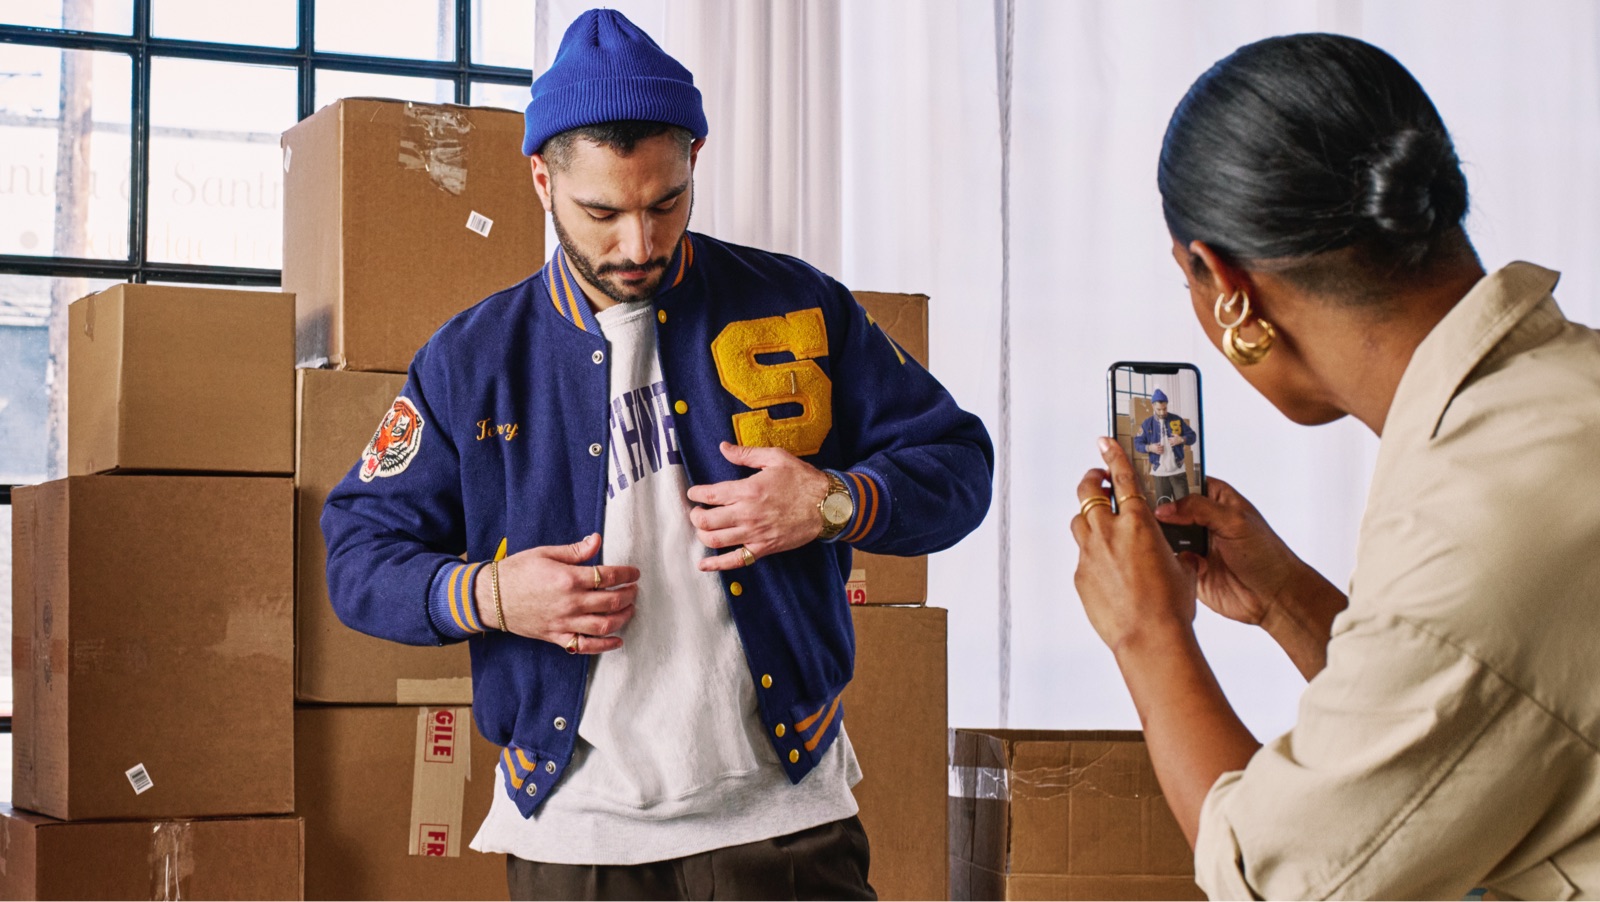 Woman taking a photo on her iPhone of a man wearing a blue jacket standing in front of packing boxes.